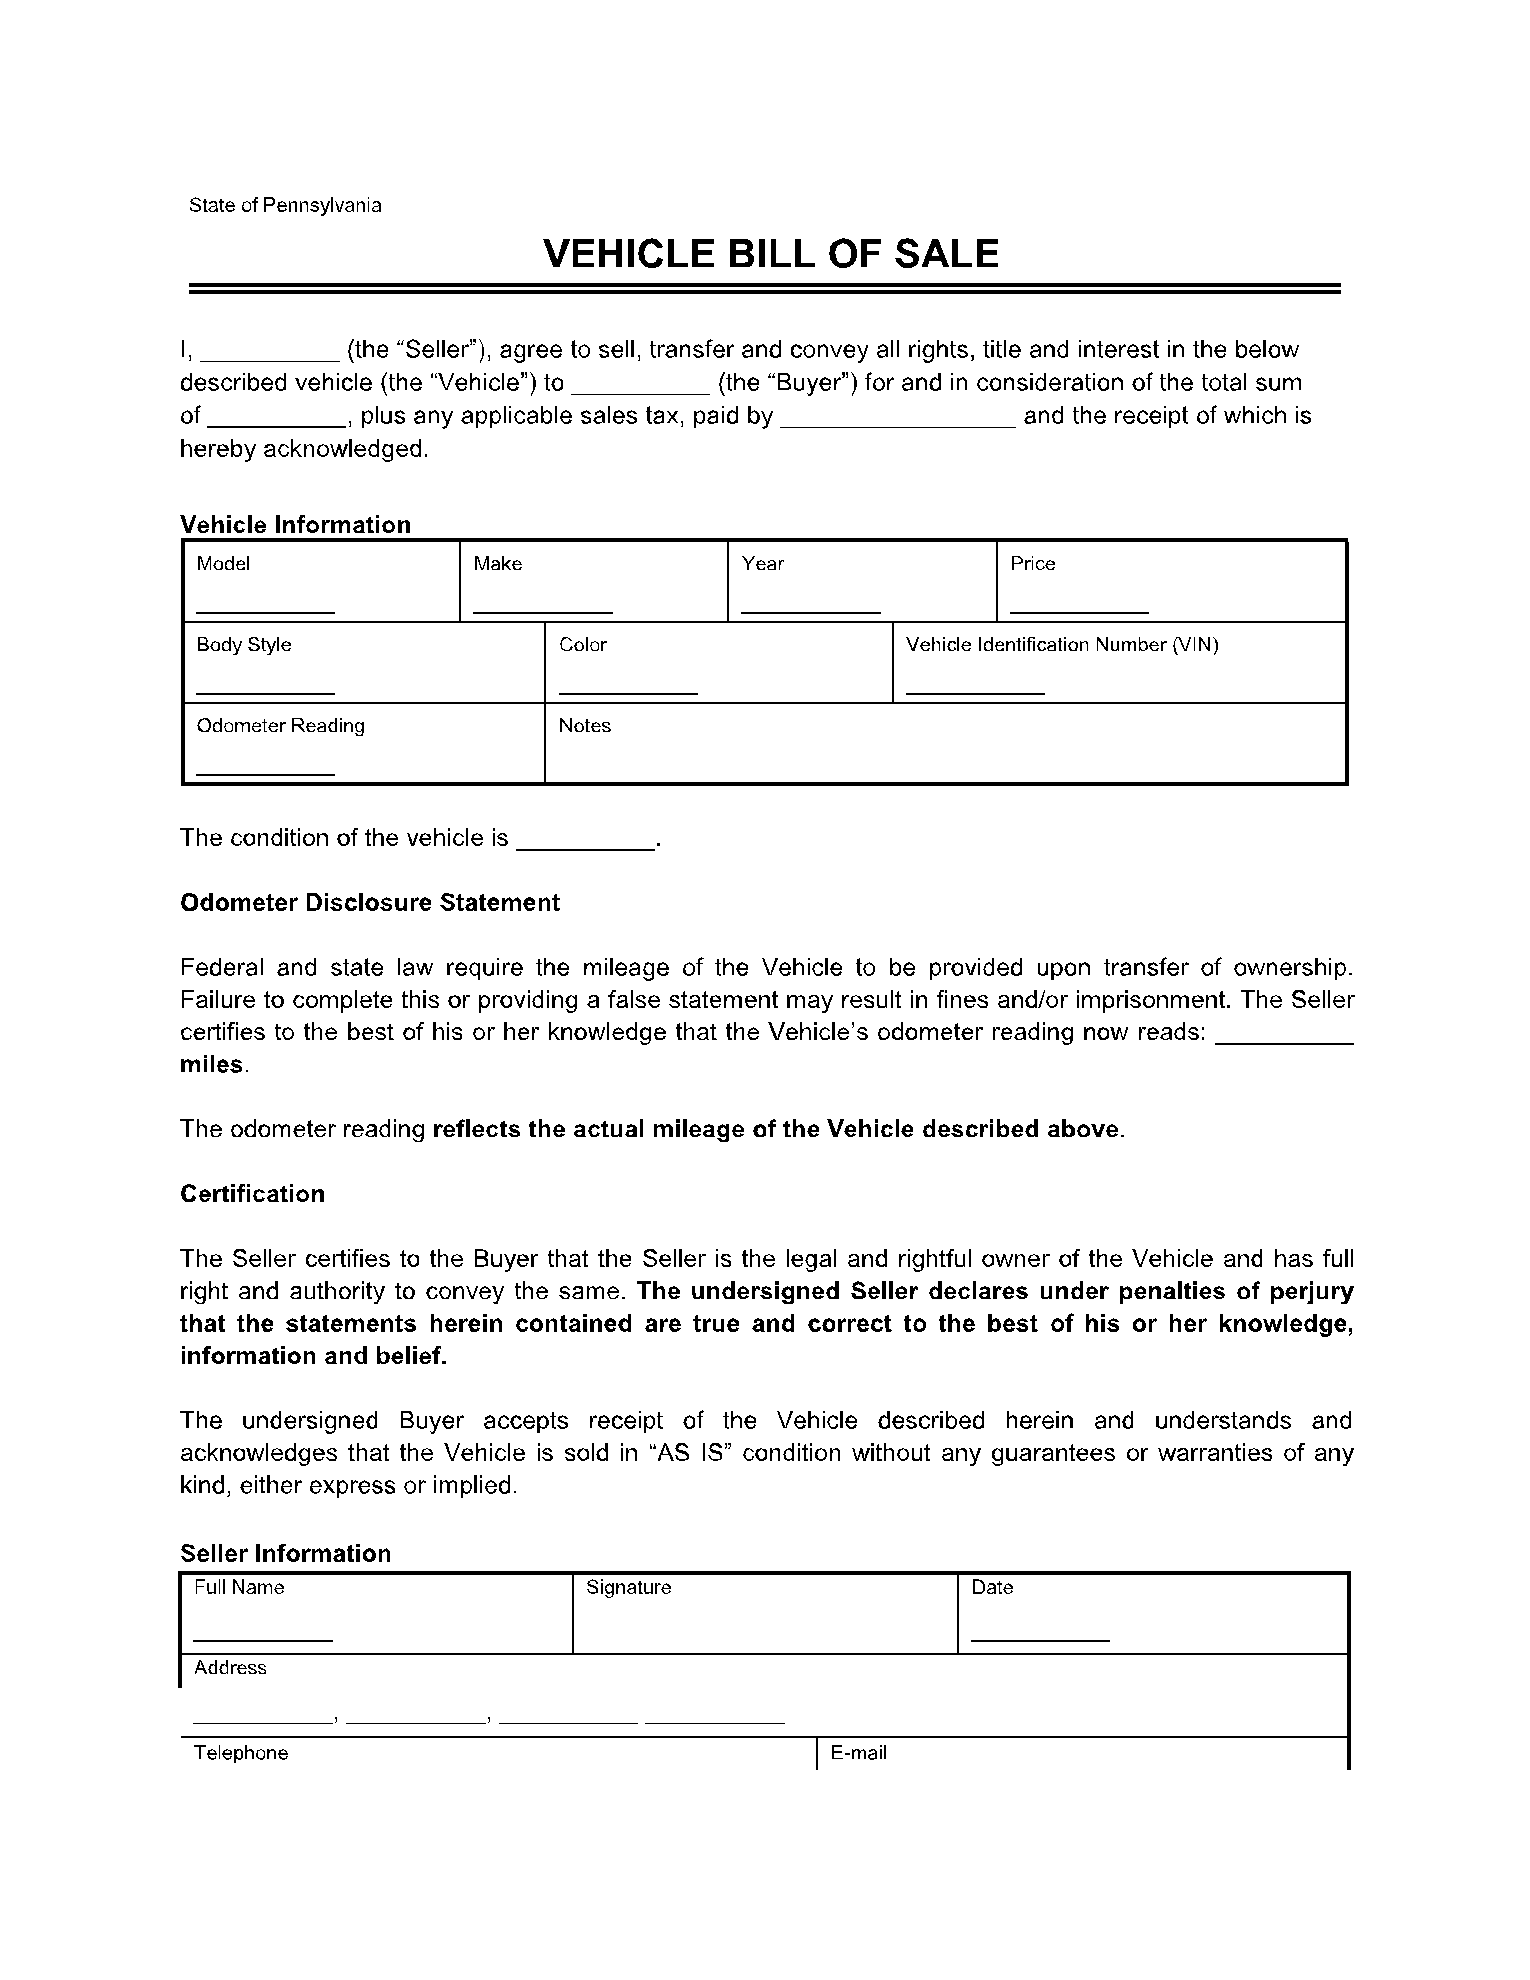 Vehicle Bill of Sale Pennsylvania Forms